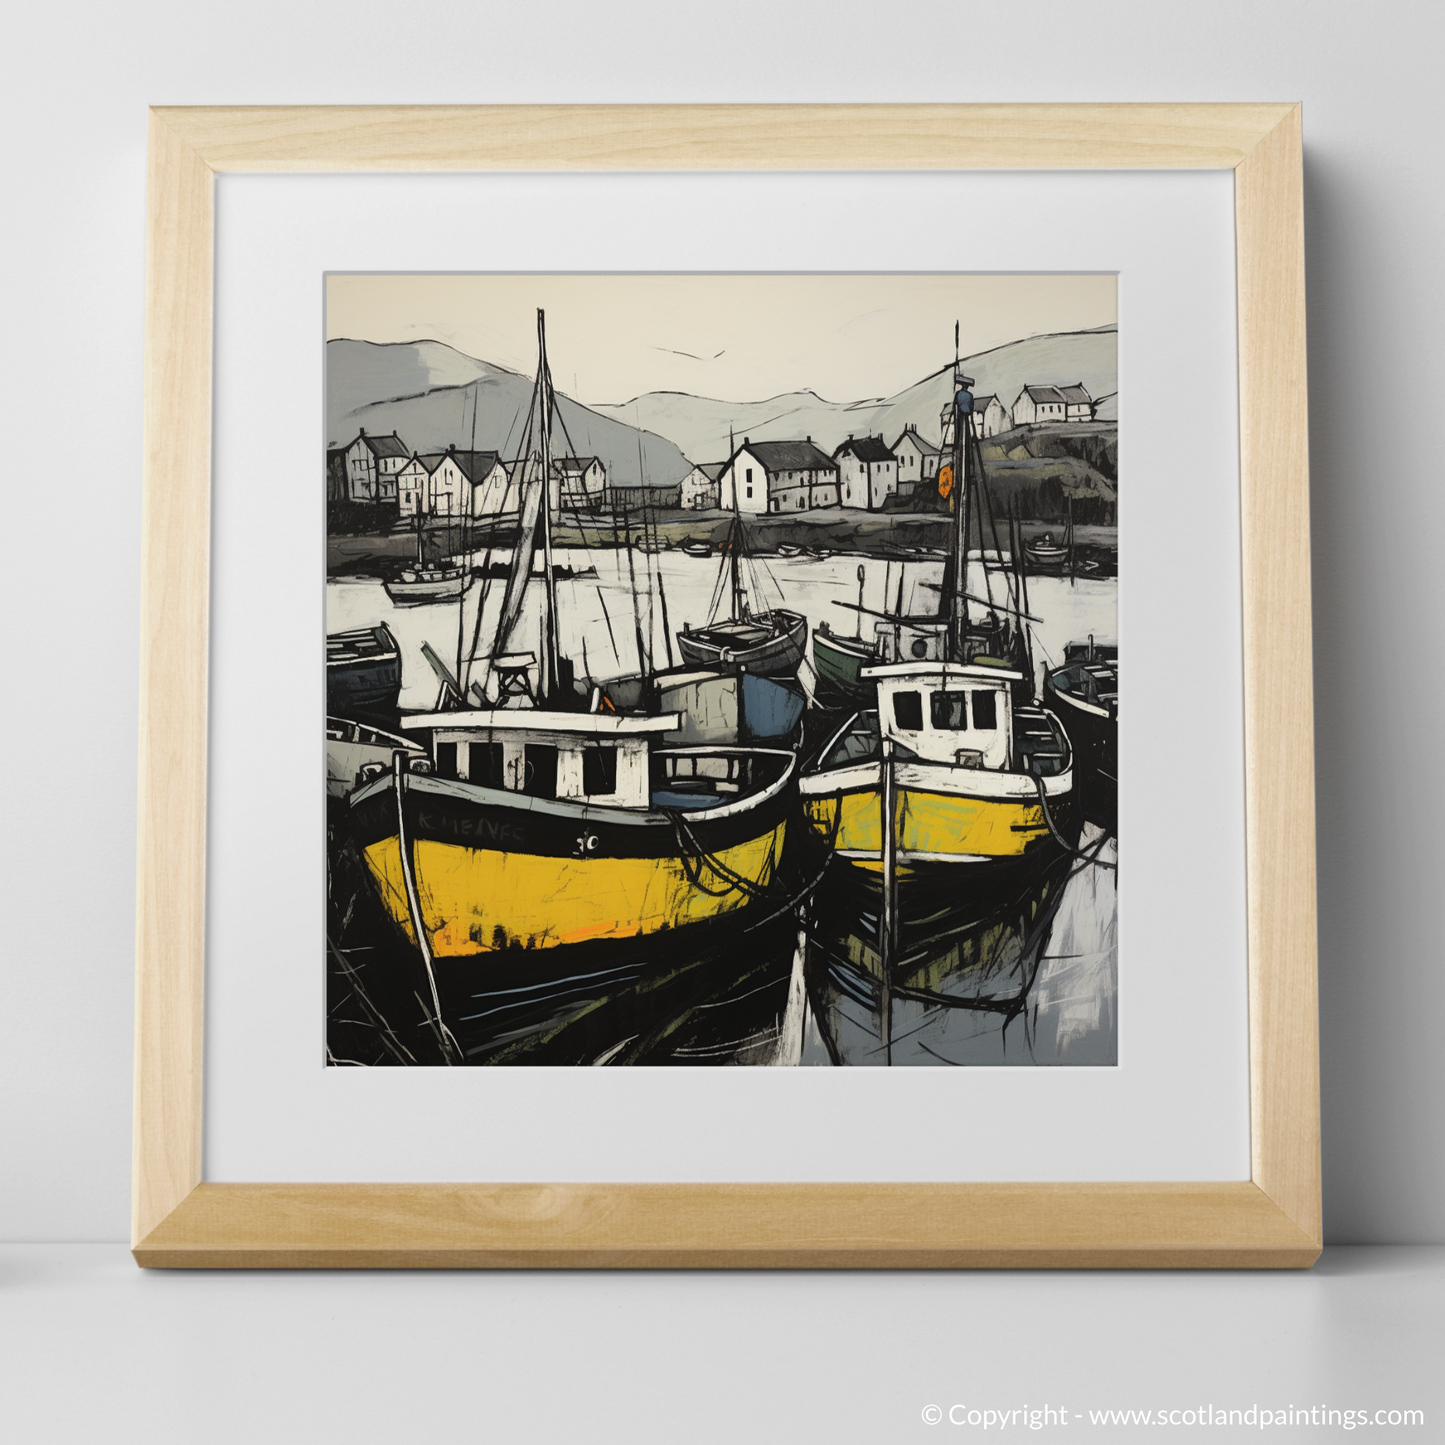 Harbour Hues: An Illustrative Expression of Castlebay, Isle of Barra